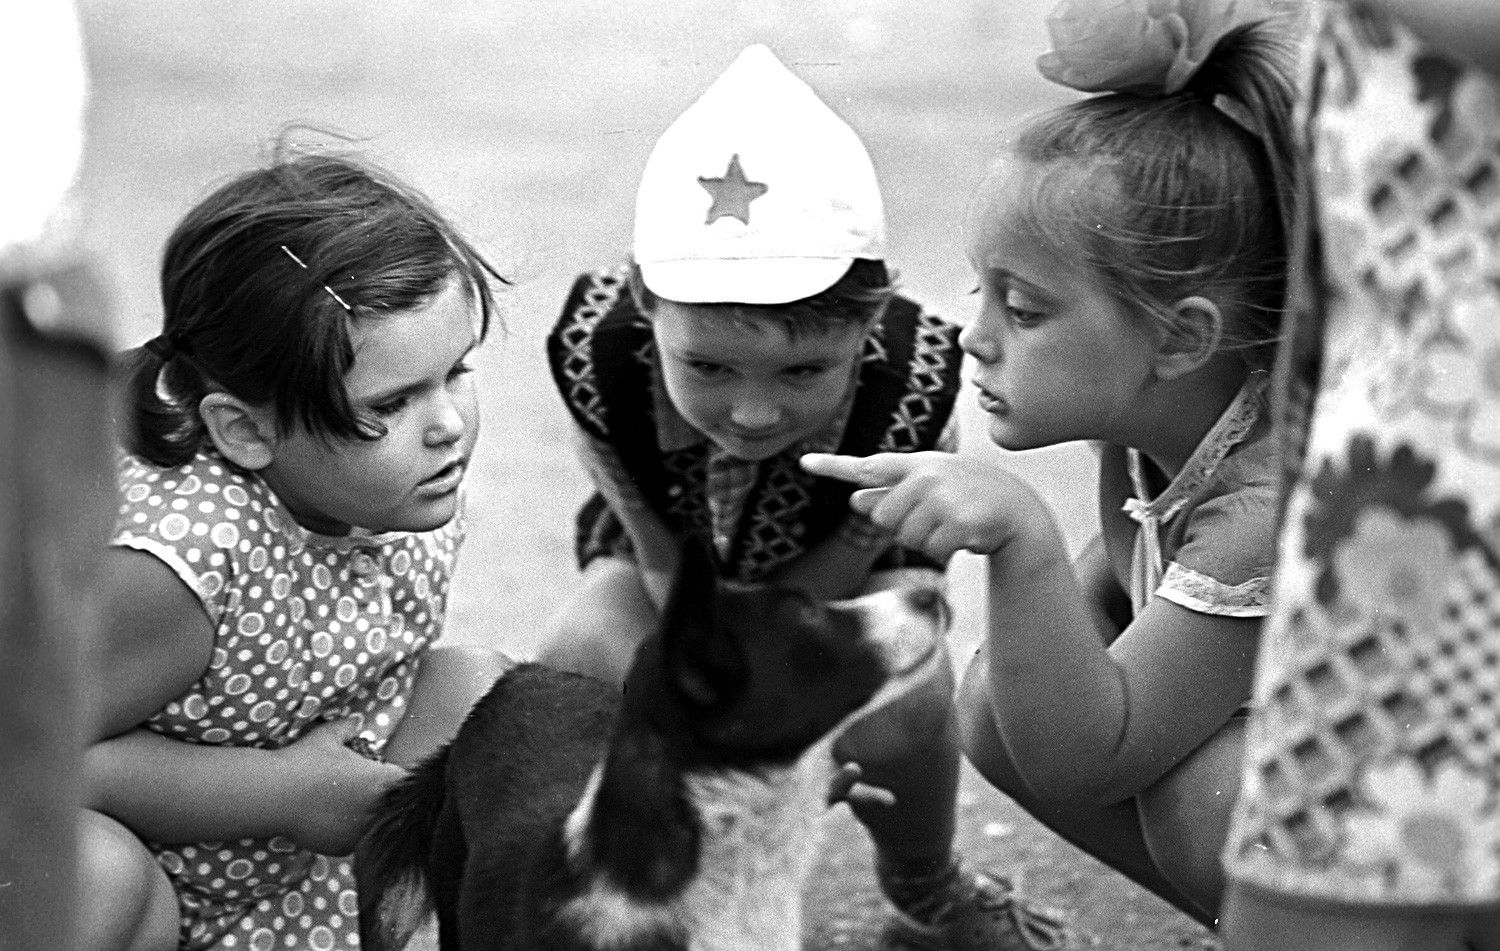 Children playing with a dog, Crimea. 